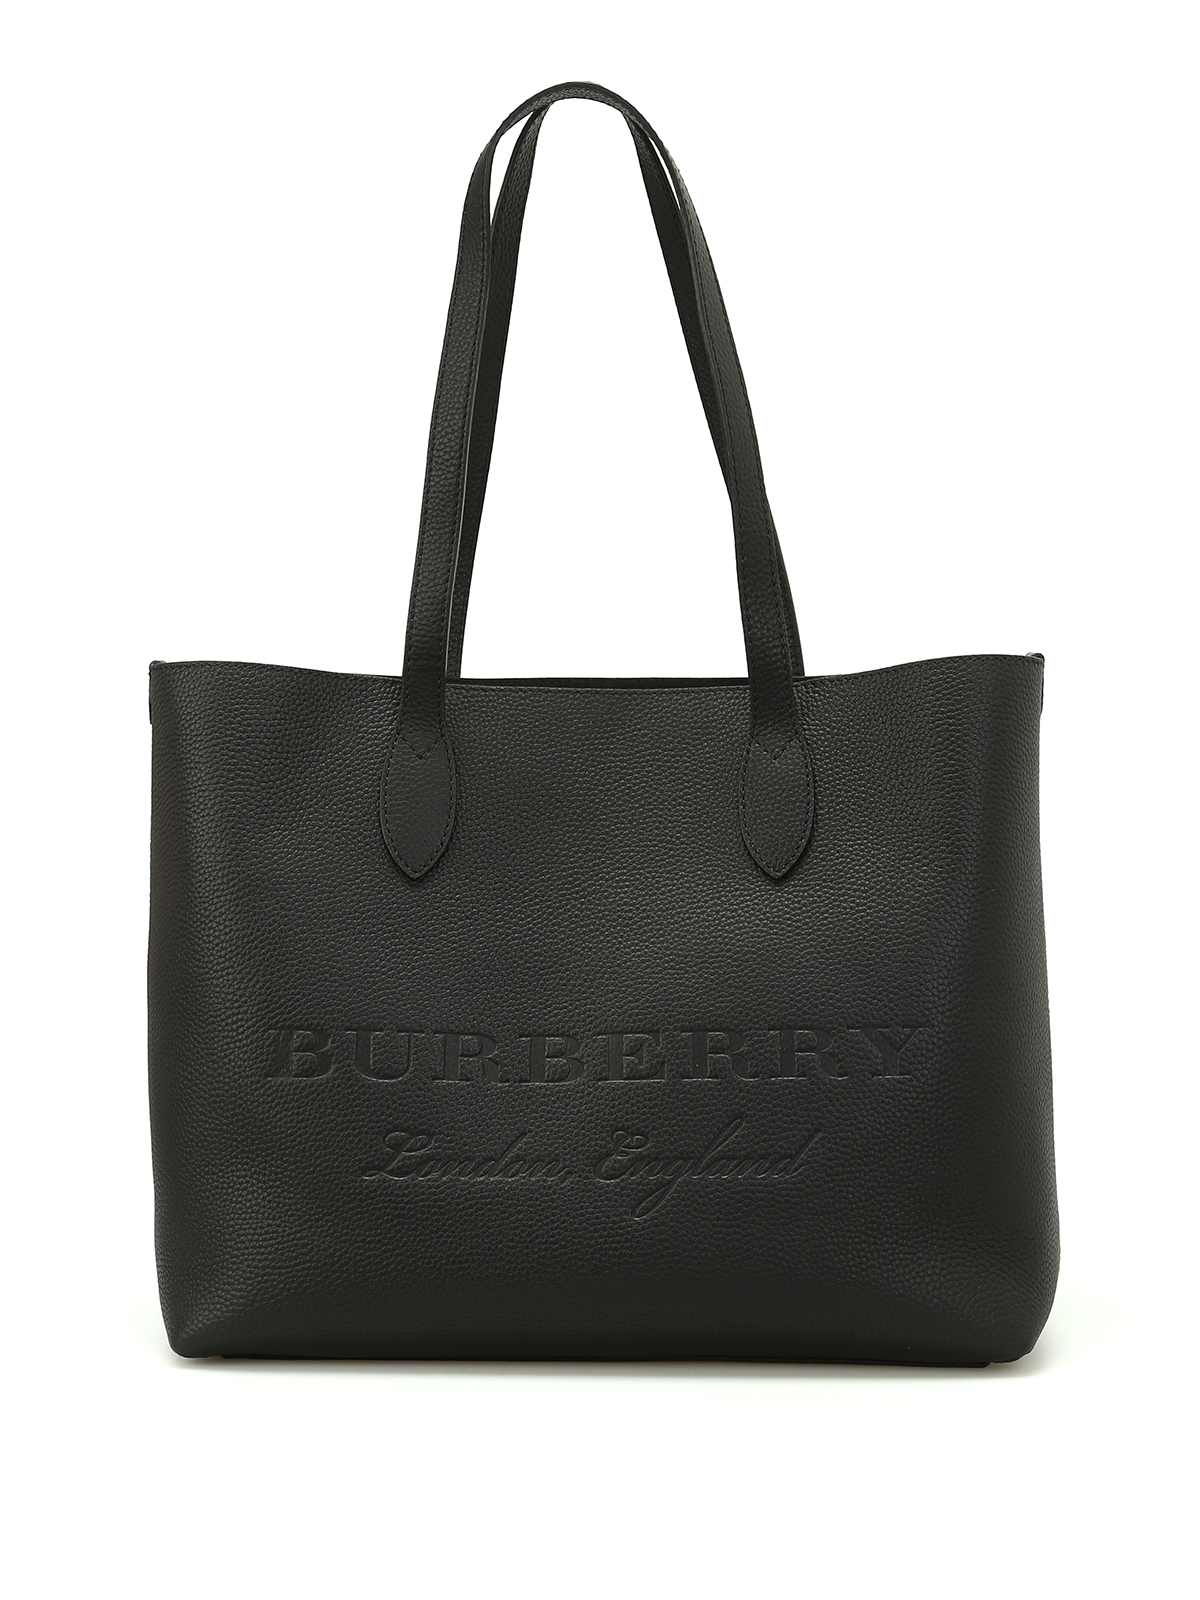 Totes bags Burberry - Remington black leather large tote - 4060096